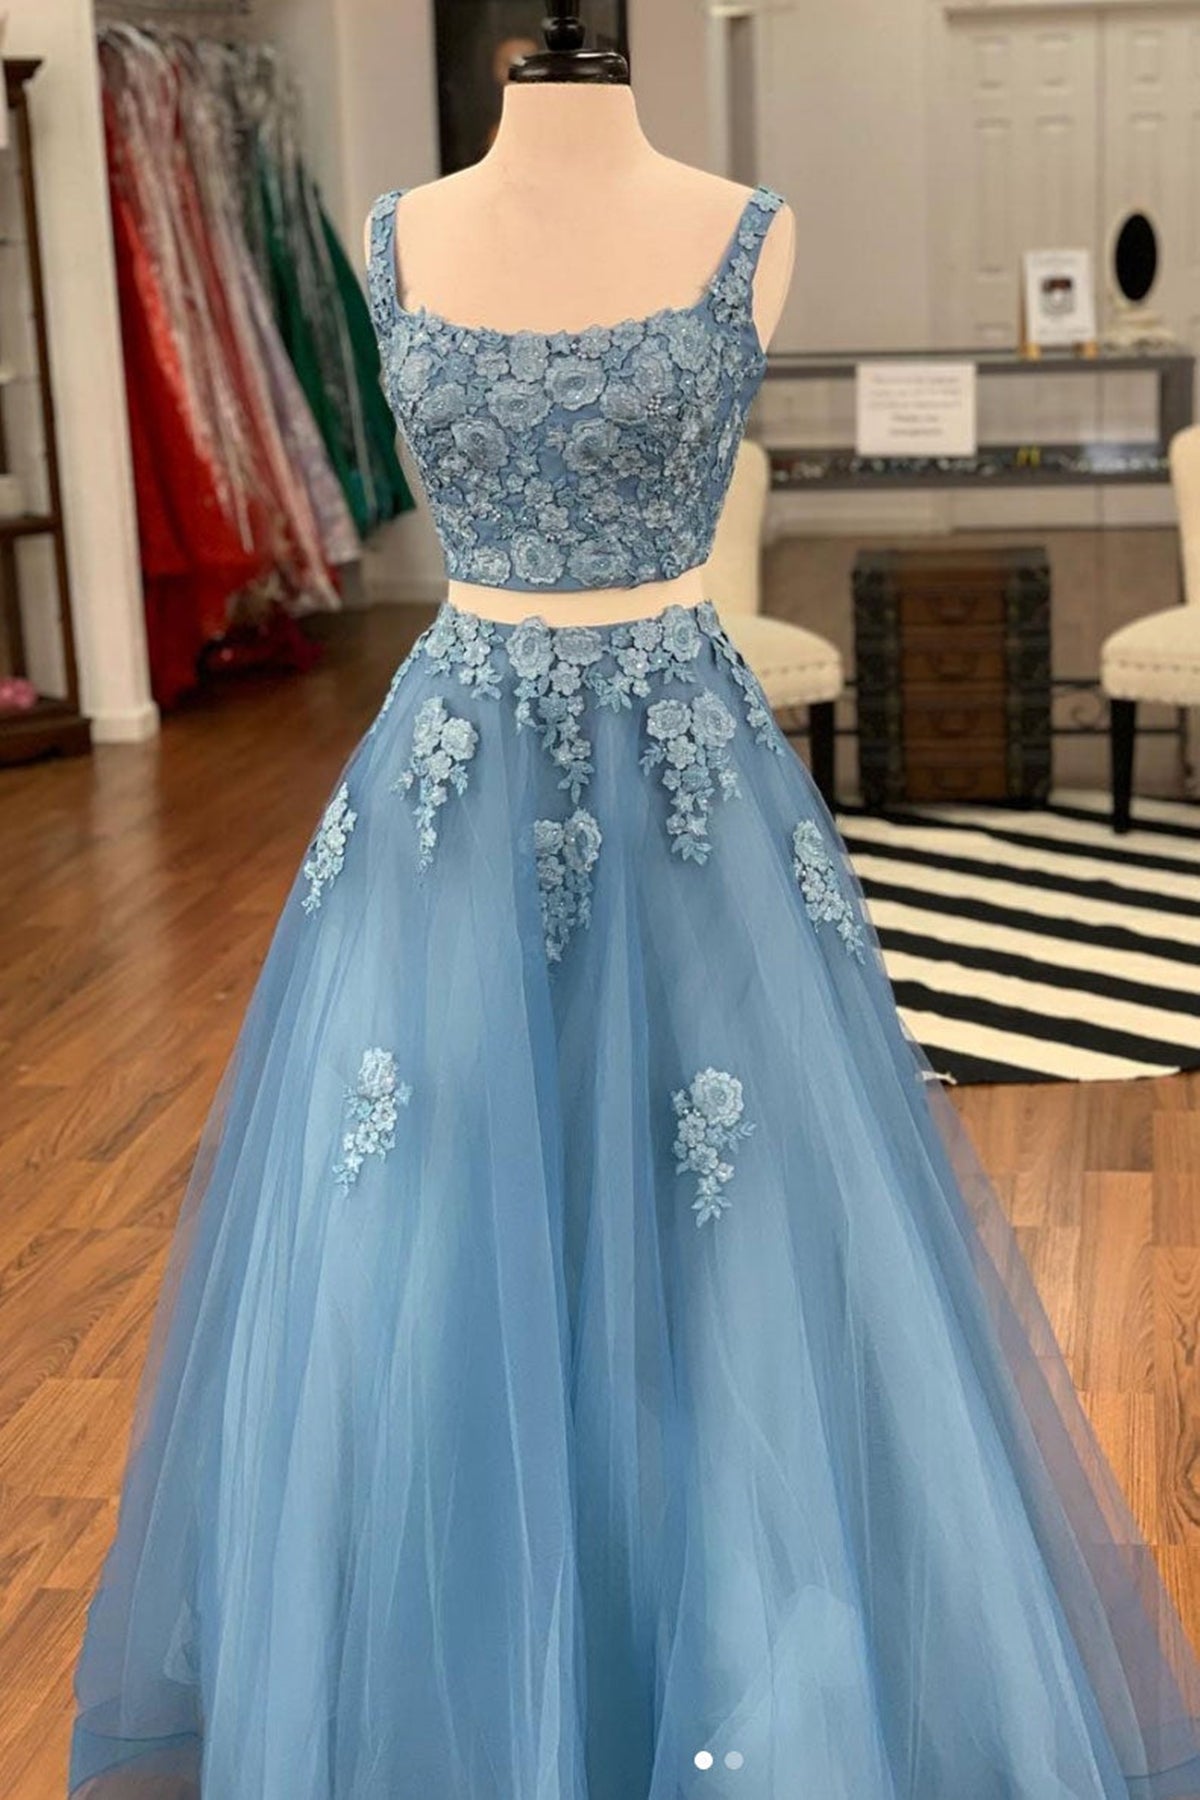 Blue Tulle Two Piece Lace Floral Long Prom Dresses, 2 Pieces Blue Formal Dresses, Blue Evening Dresses with Appliques